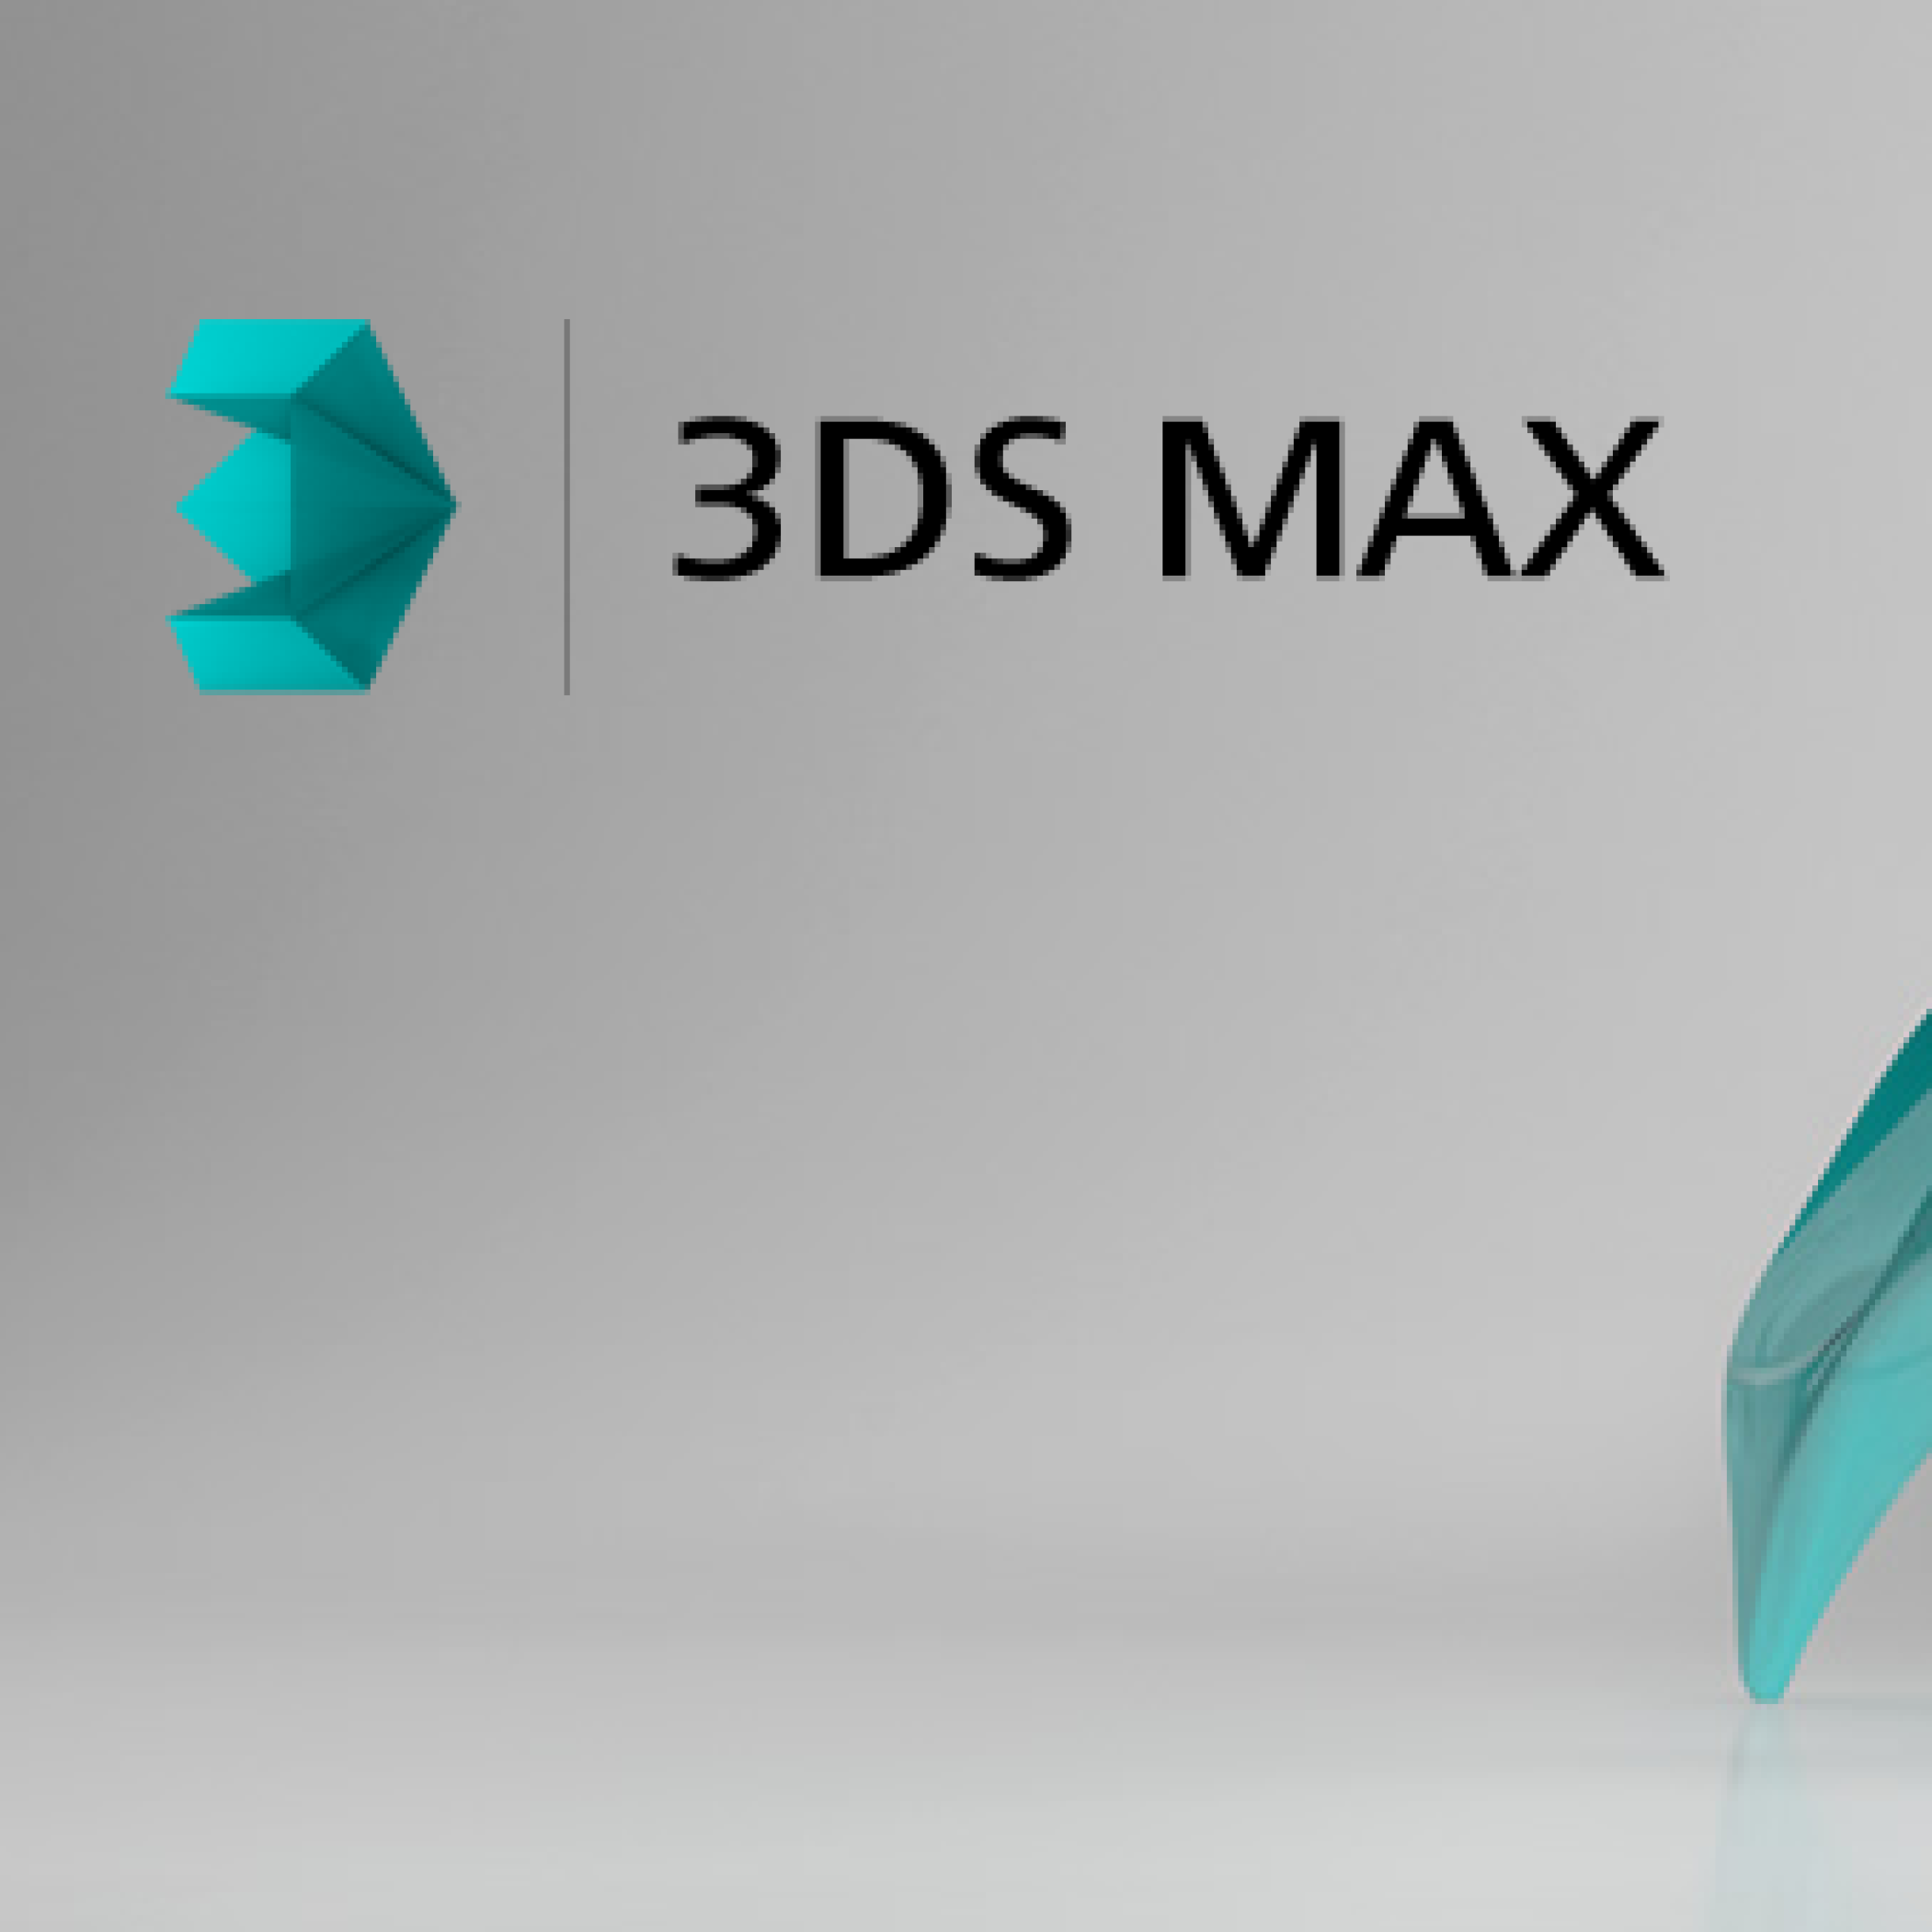 3DS MAX logo, Vector Logo of 3DS MAX brand free download (eps, ai, png ...